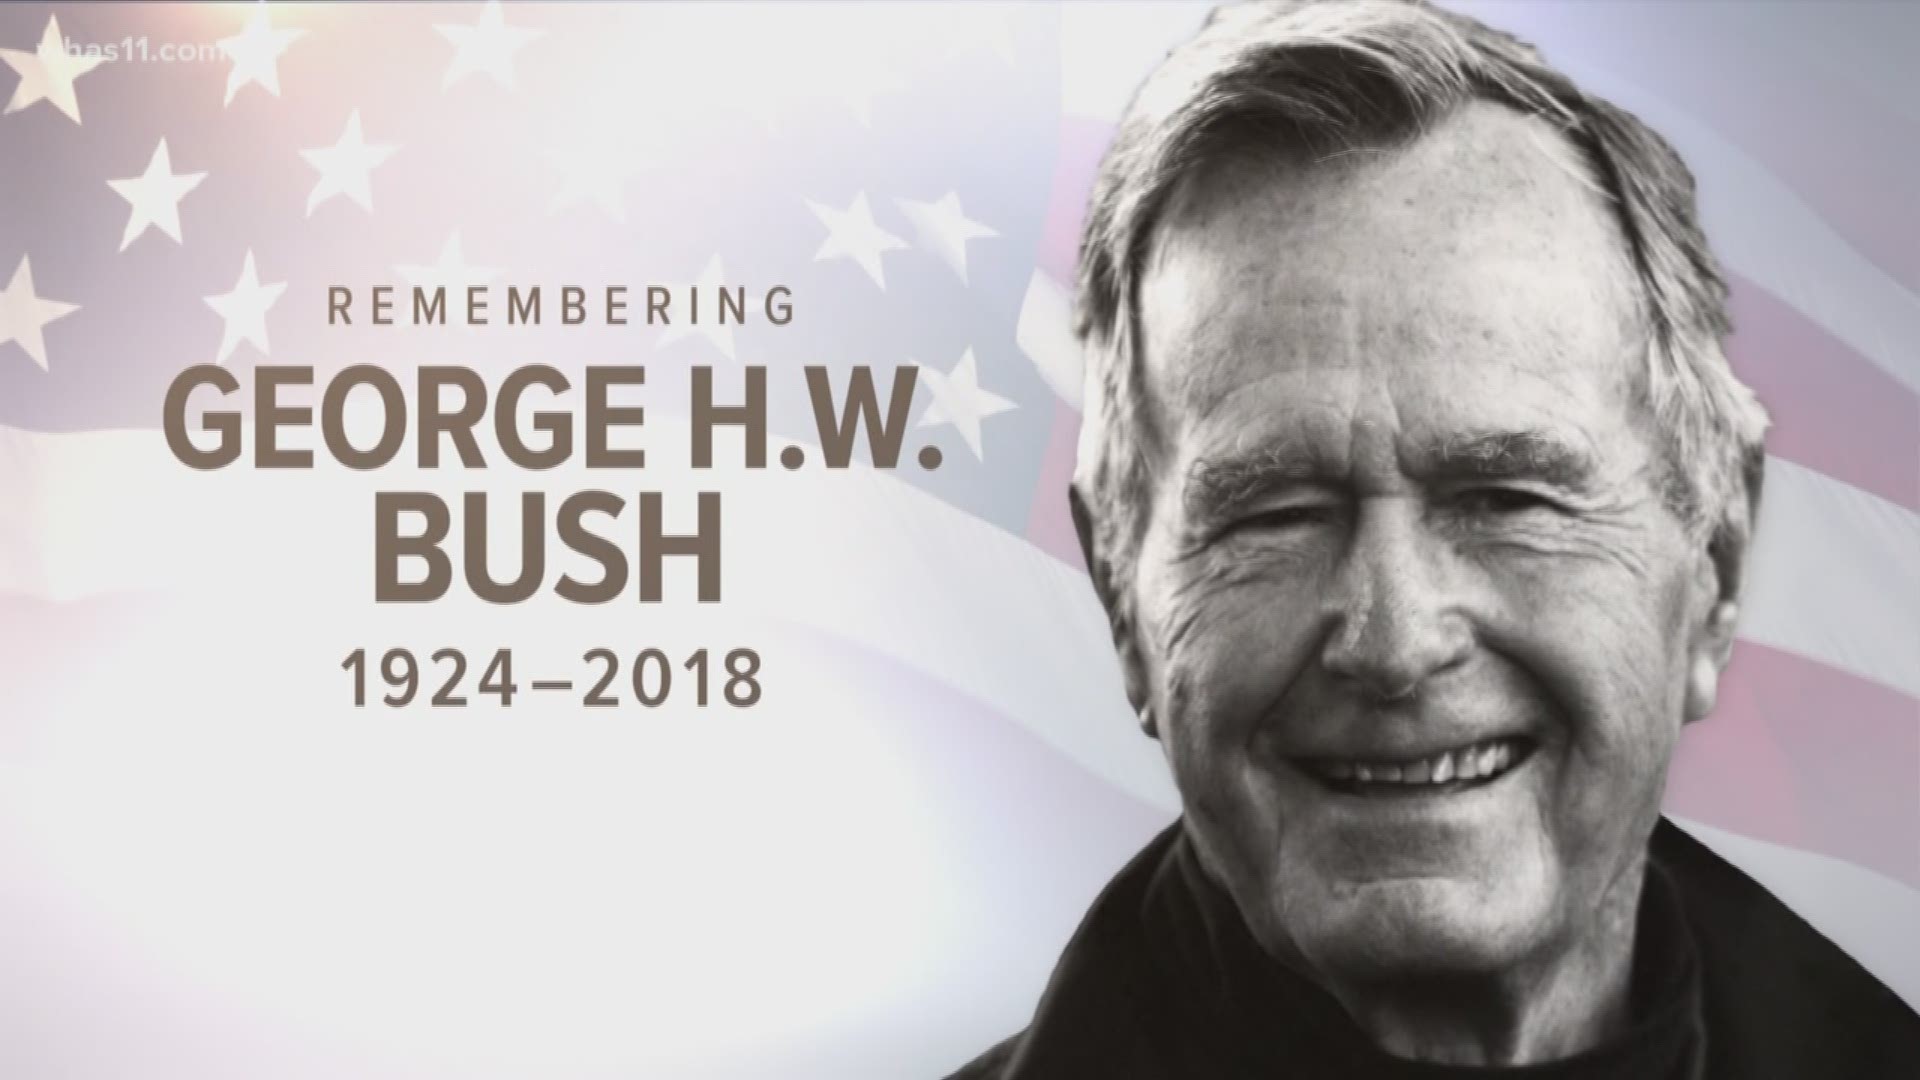 Former President George H.W. Bush has returned to Washington one final time. This afternoon, his body was flown from Texas to the Nation's capital ahead of his state funeral this week.